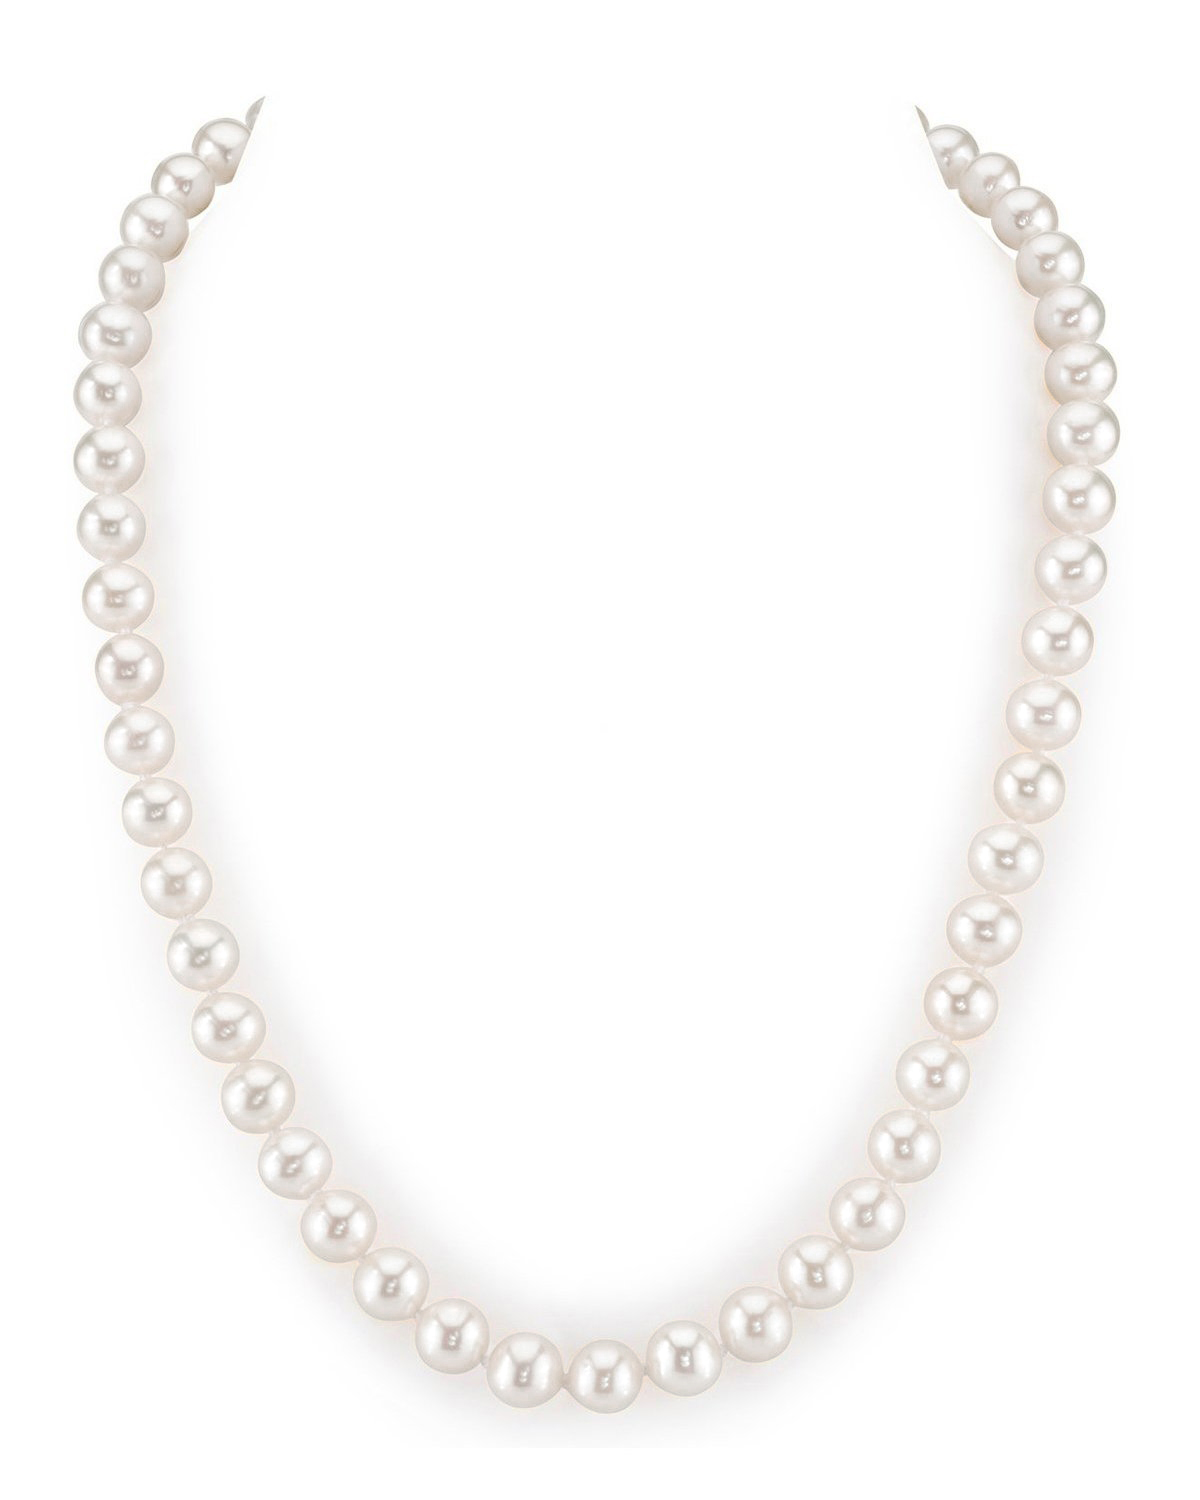 8-9mm white pearl necklace princess white 17.5/'/'45cm length high lustre no flaw gifts for her for mother B0013 AAA